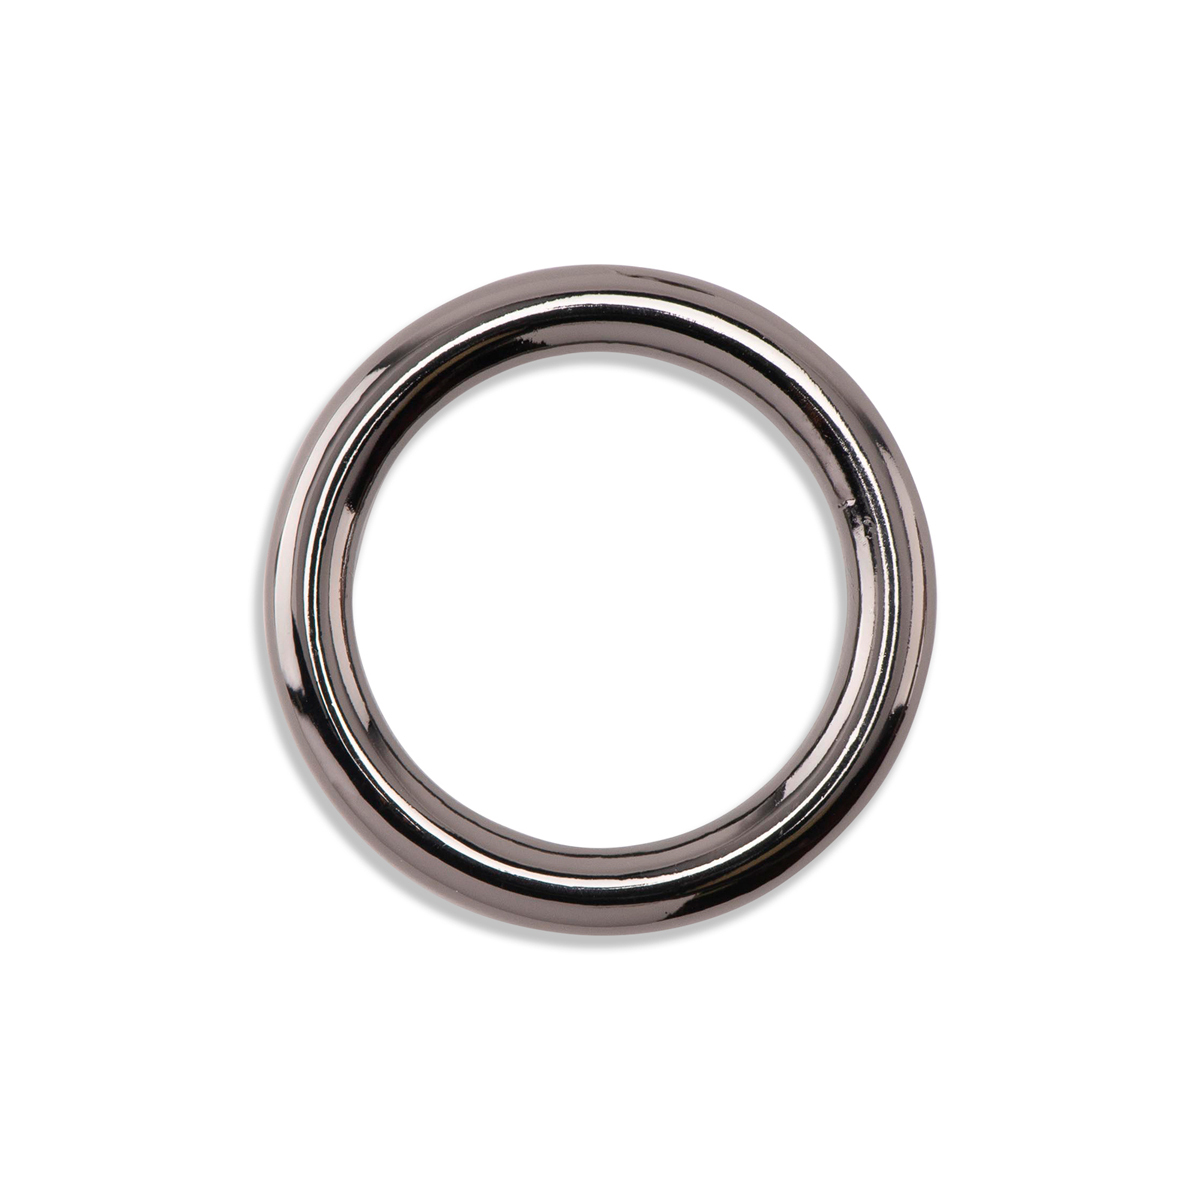 Metal O Rings Welded,diy Silver Ring,o Rings,purse Bag Making Hardware  Supplies,round Rings for Jewelry Making-48mmx38mm4pcs 